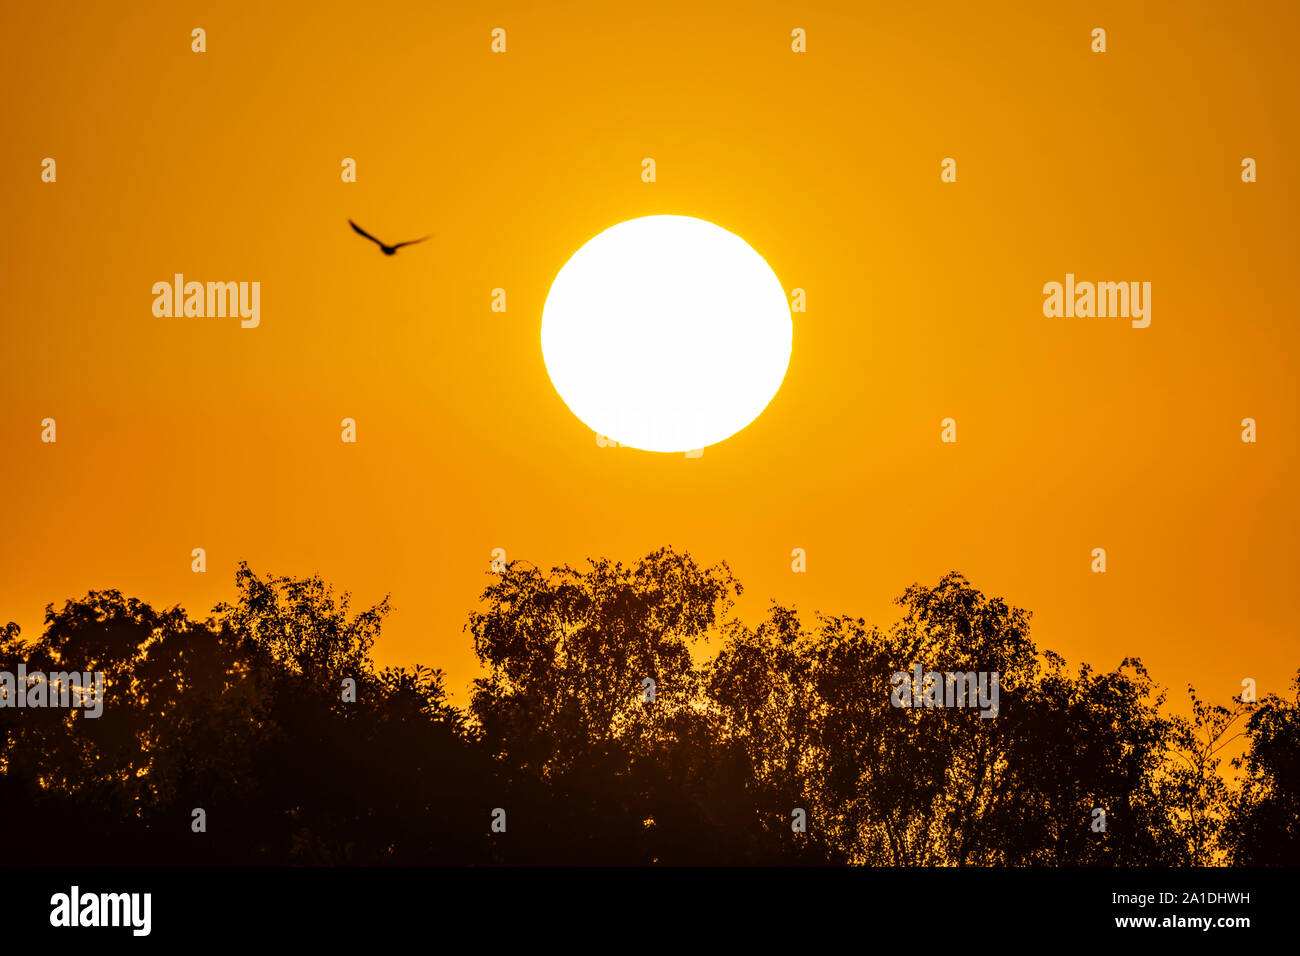 The sun rises gloriously nearly September Equinox morning in co. Wexford, Ireland. Stock Photo